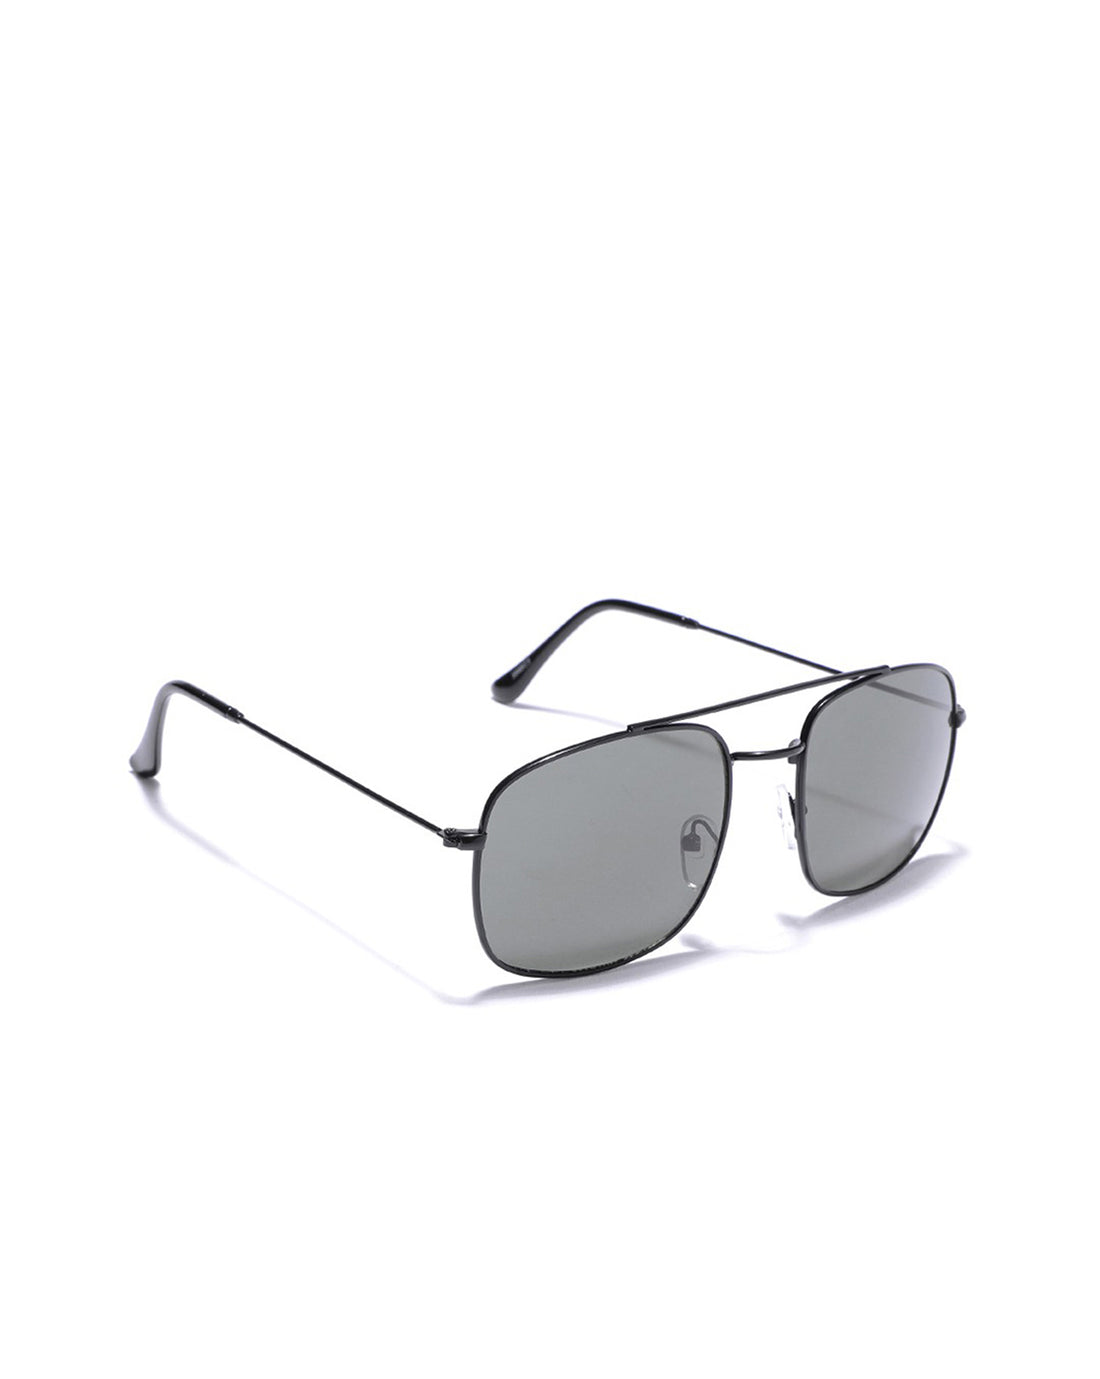 Carlton London Square Sunglasses With UV Protected Lens For Men